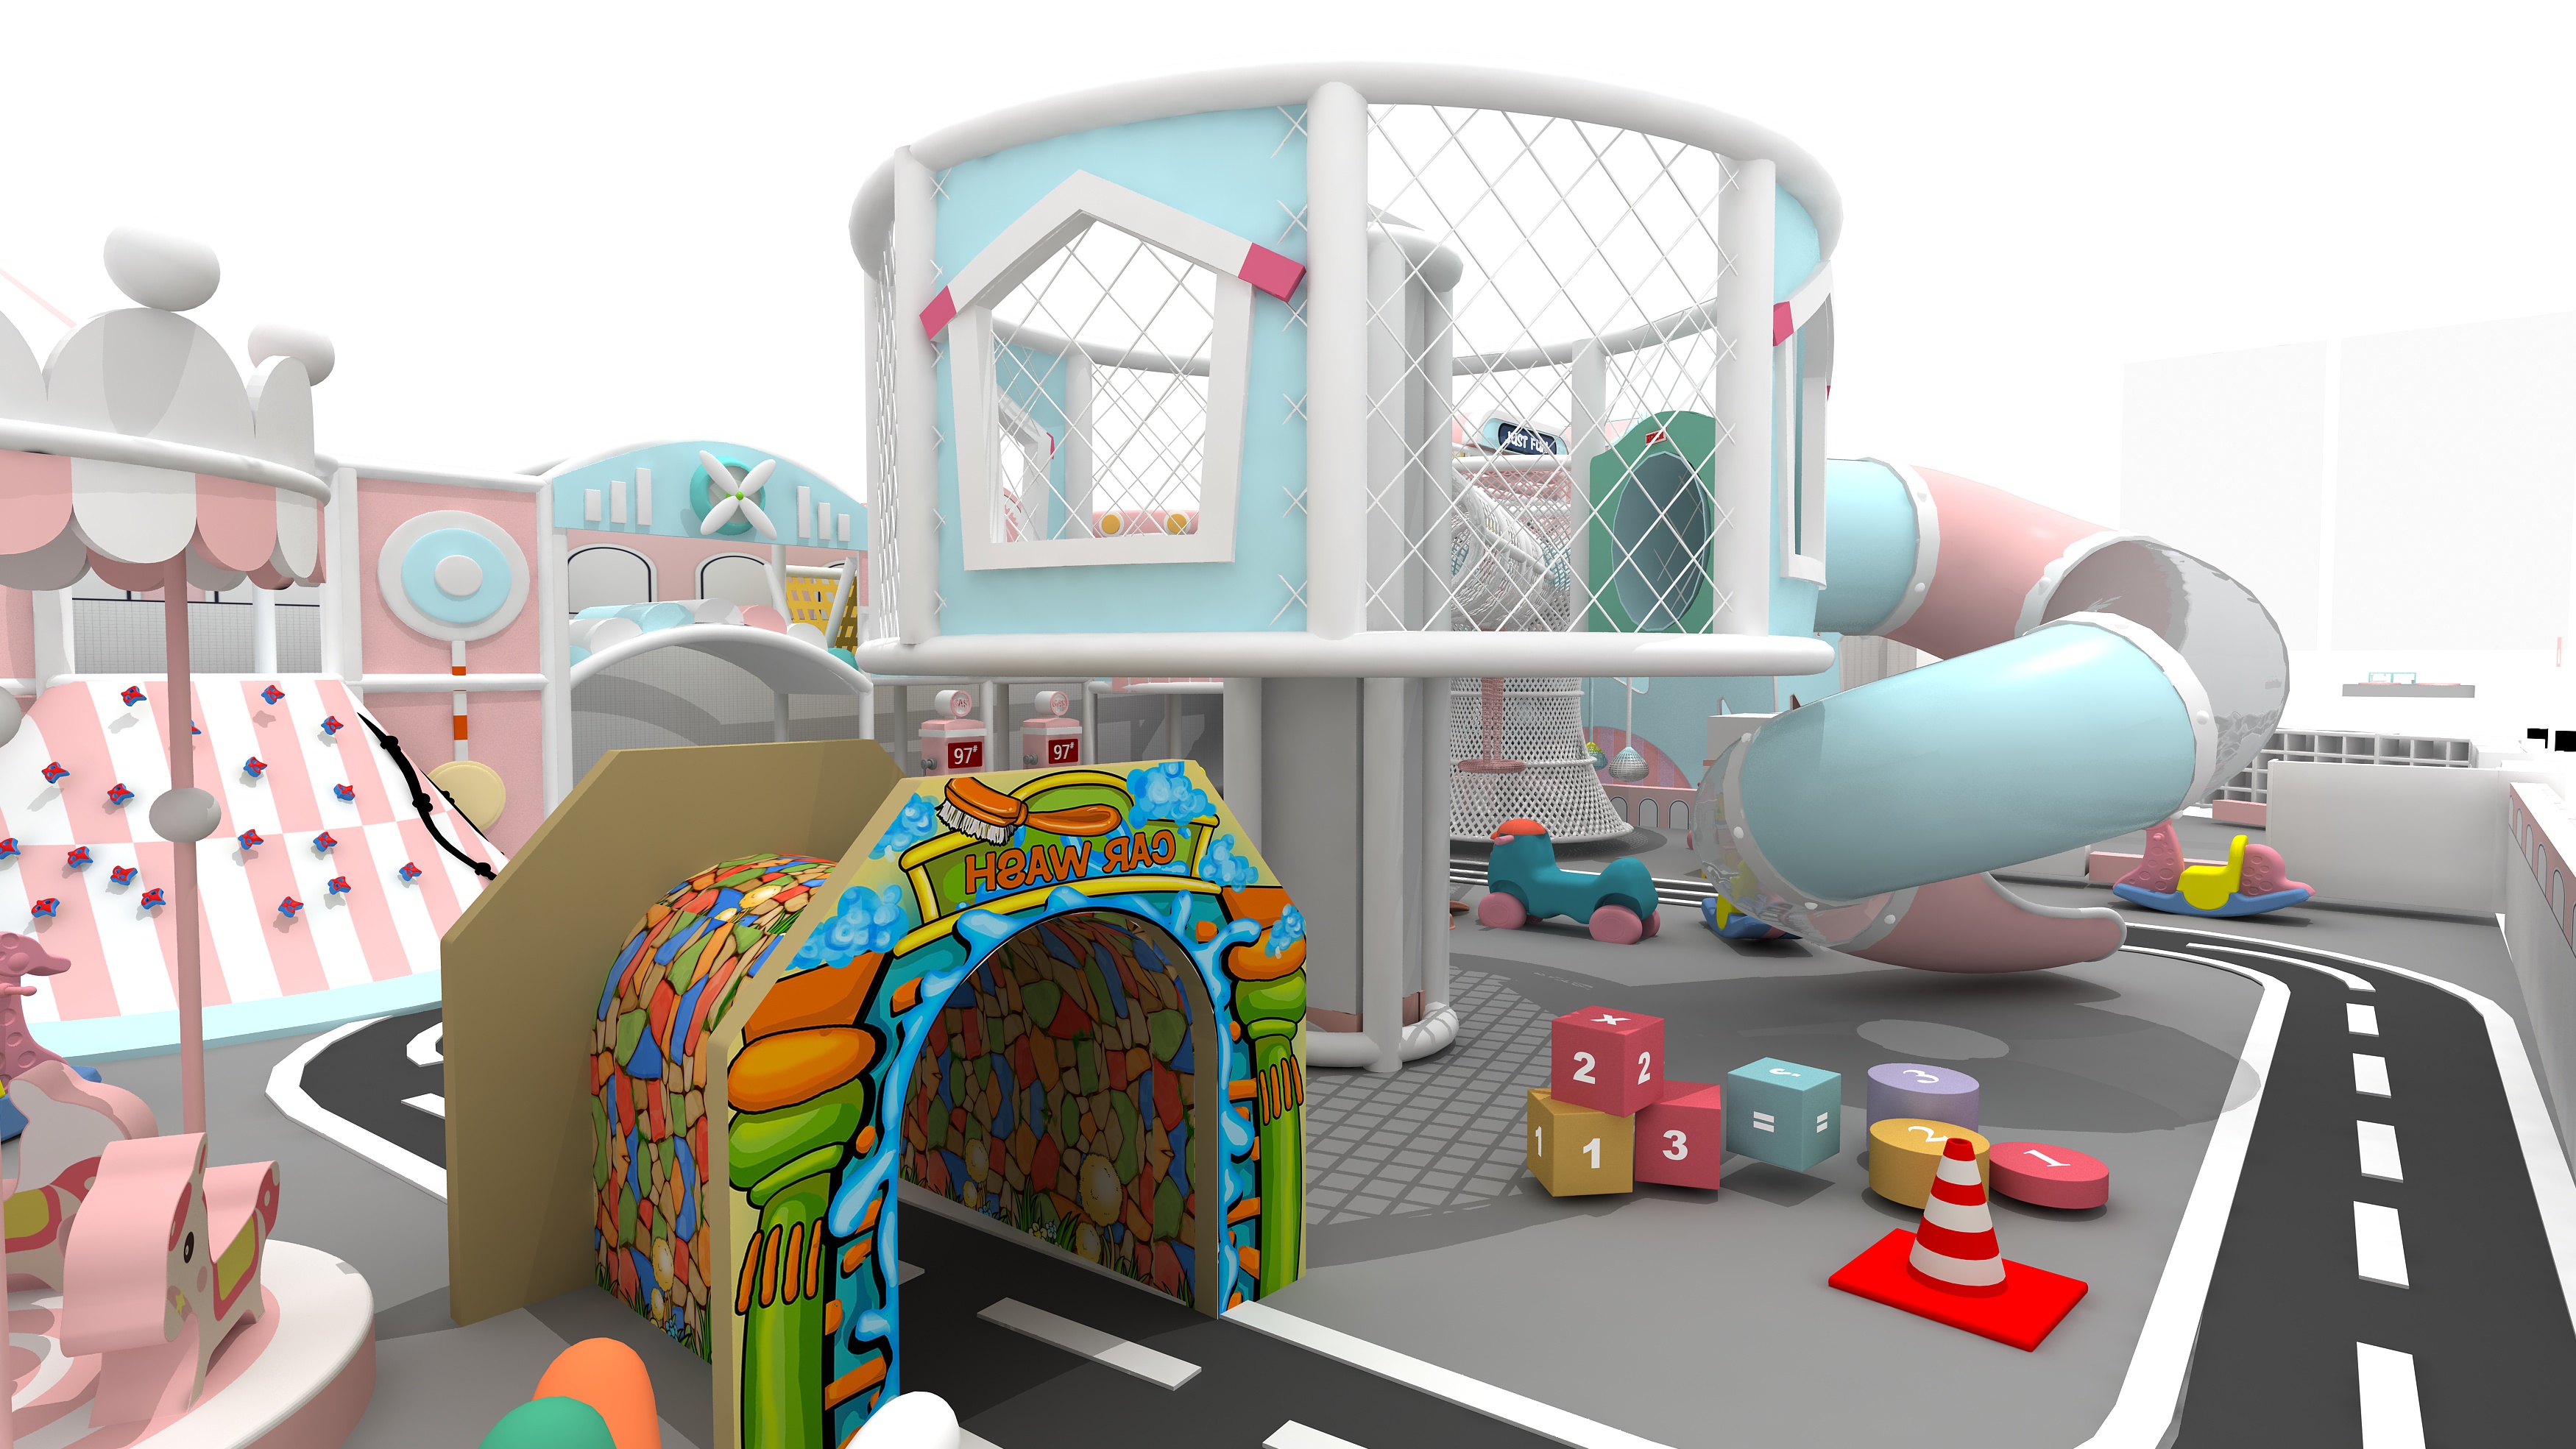 How do you make an indoor play space?